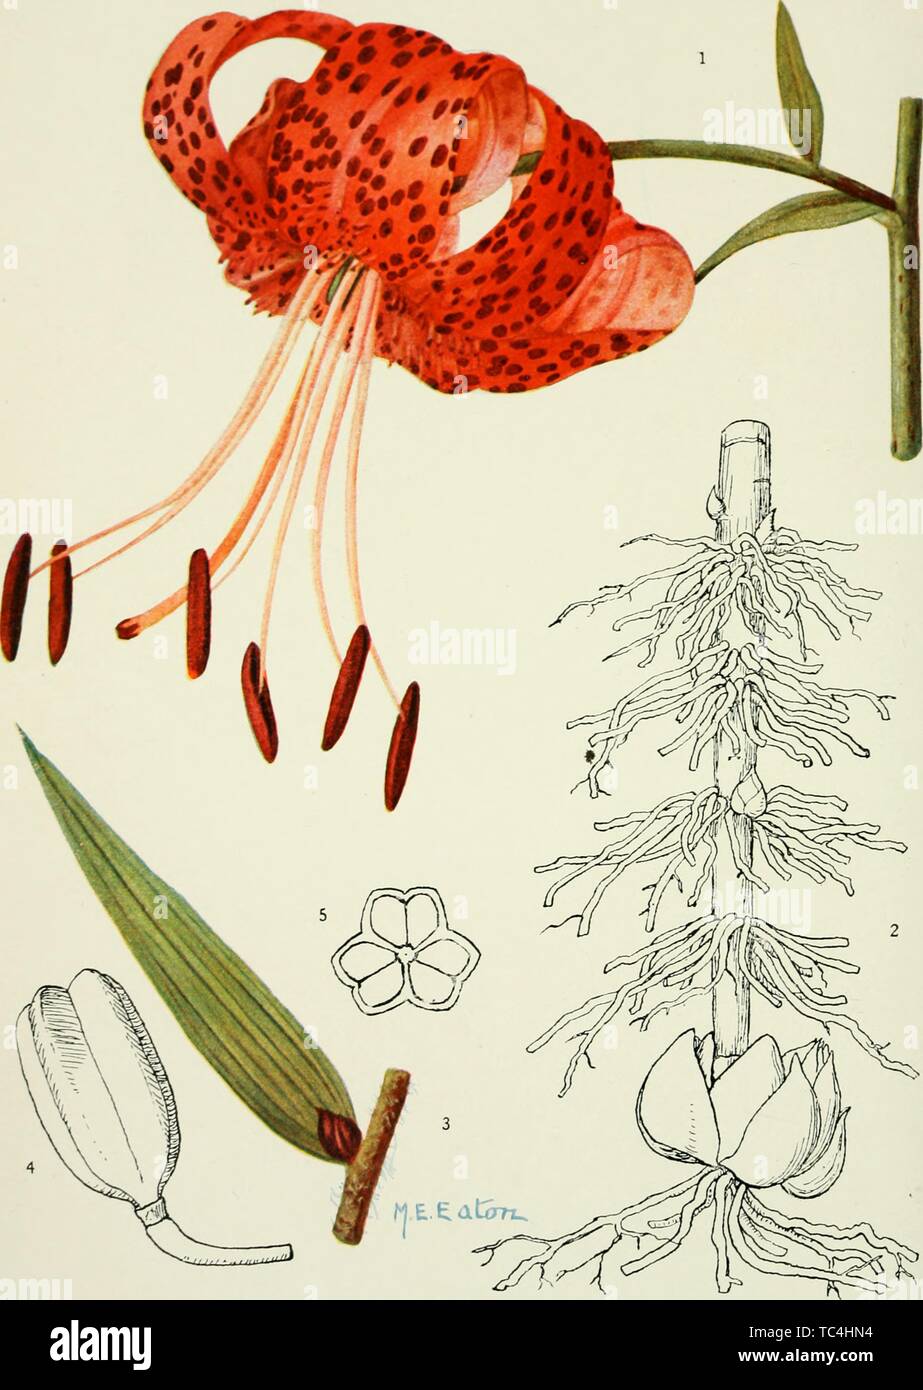 Engravings of the Lilium Tigrinum, from the book 'Addisonia' by the New York Botanical Garden, 1923. Courtesy Internet Archive. () Stock Photo